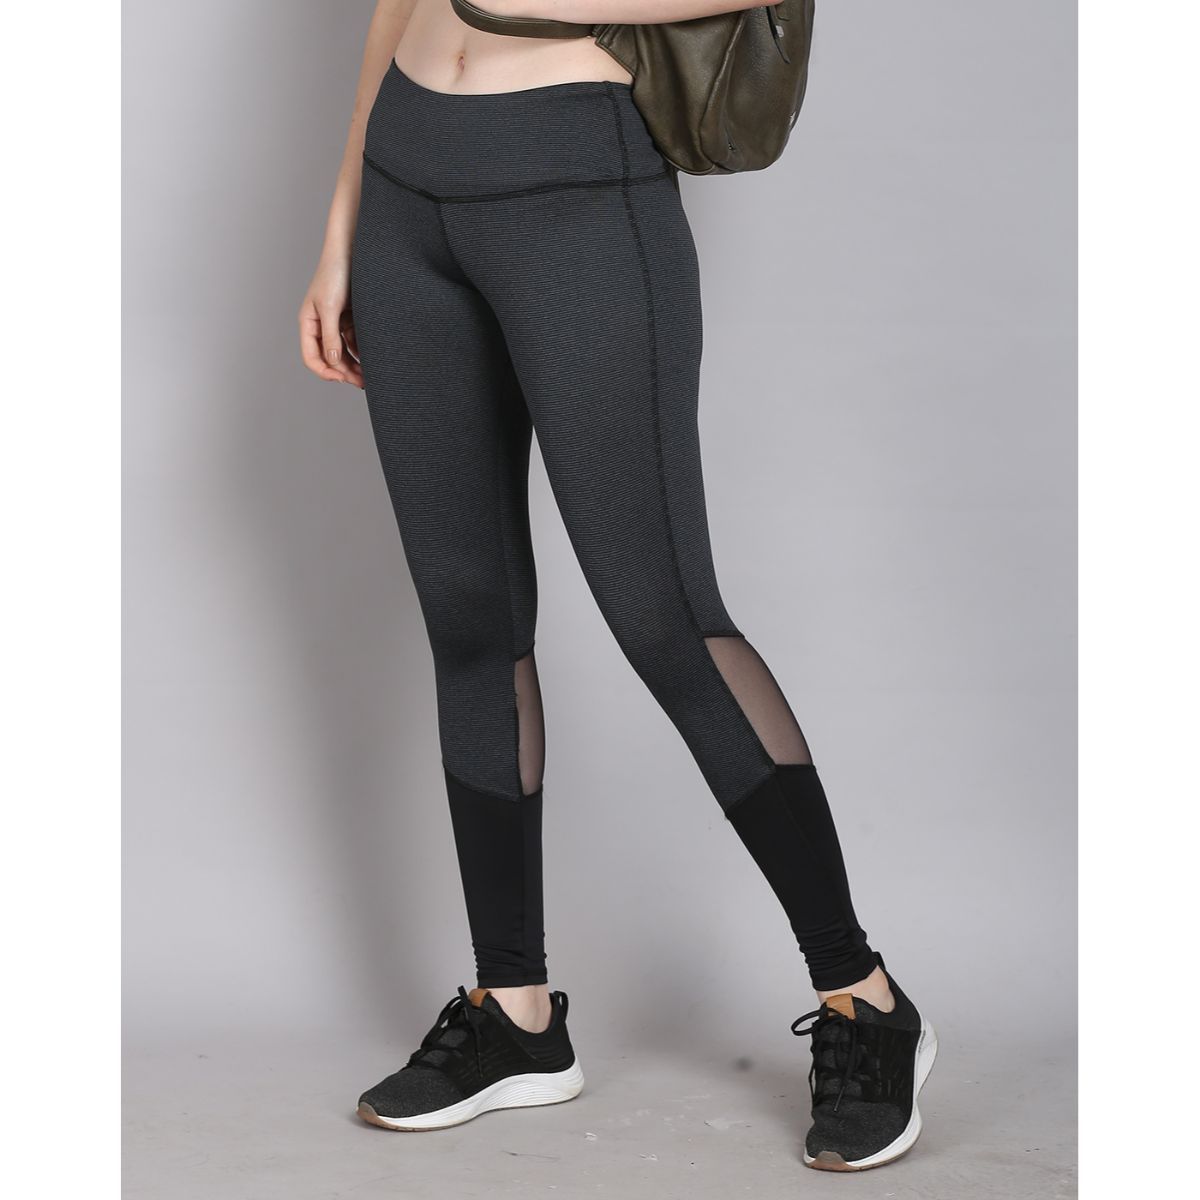 Buy Women's Microfiber Elastane Stretch Performance Leggings with  Breathable Mesh and Stay Dry Technology - Old Rose Printed MW38 | Jockey  India